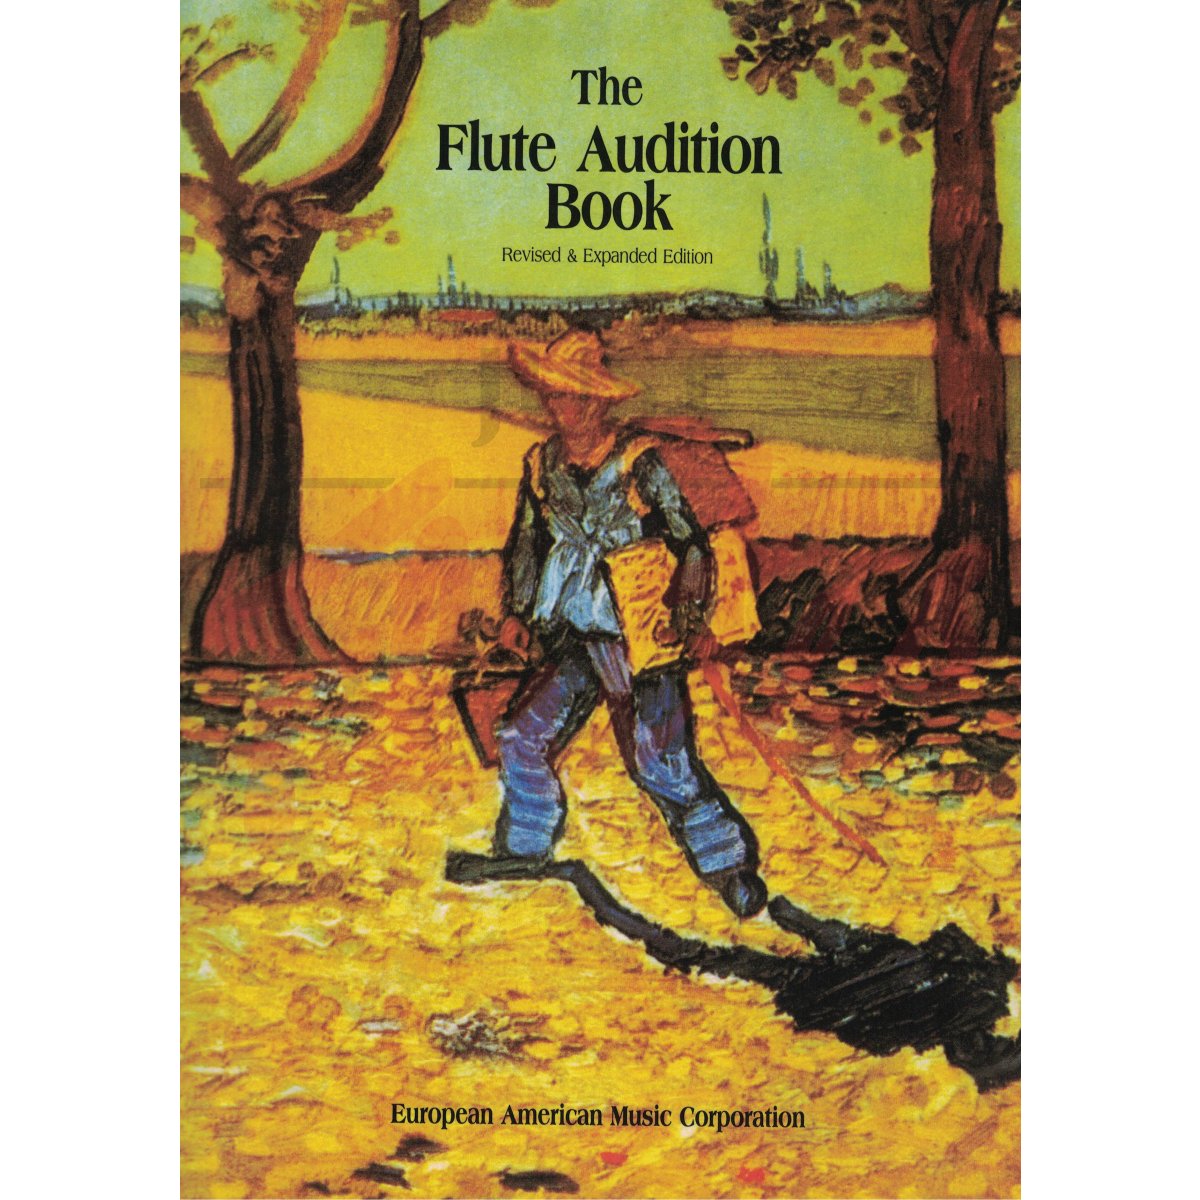 The Flute Audition Book